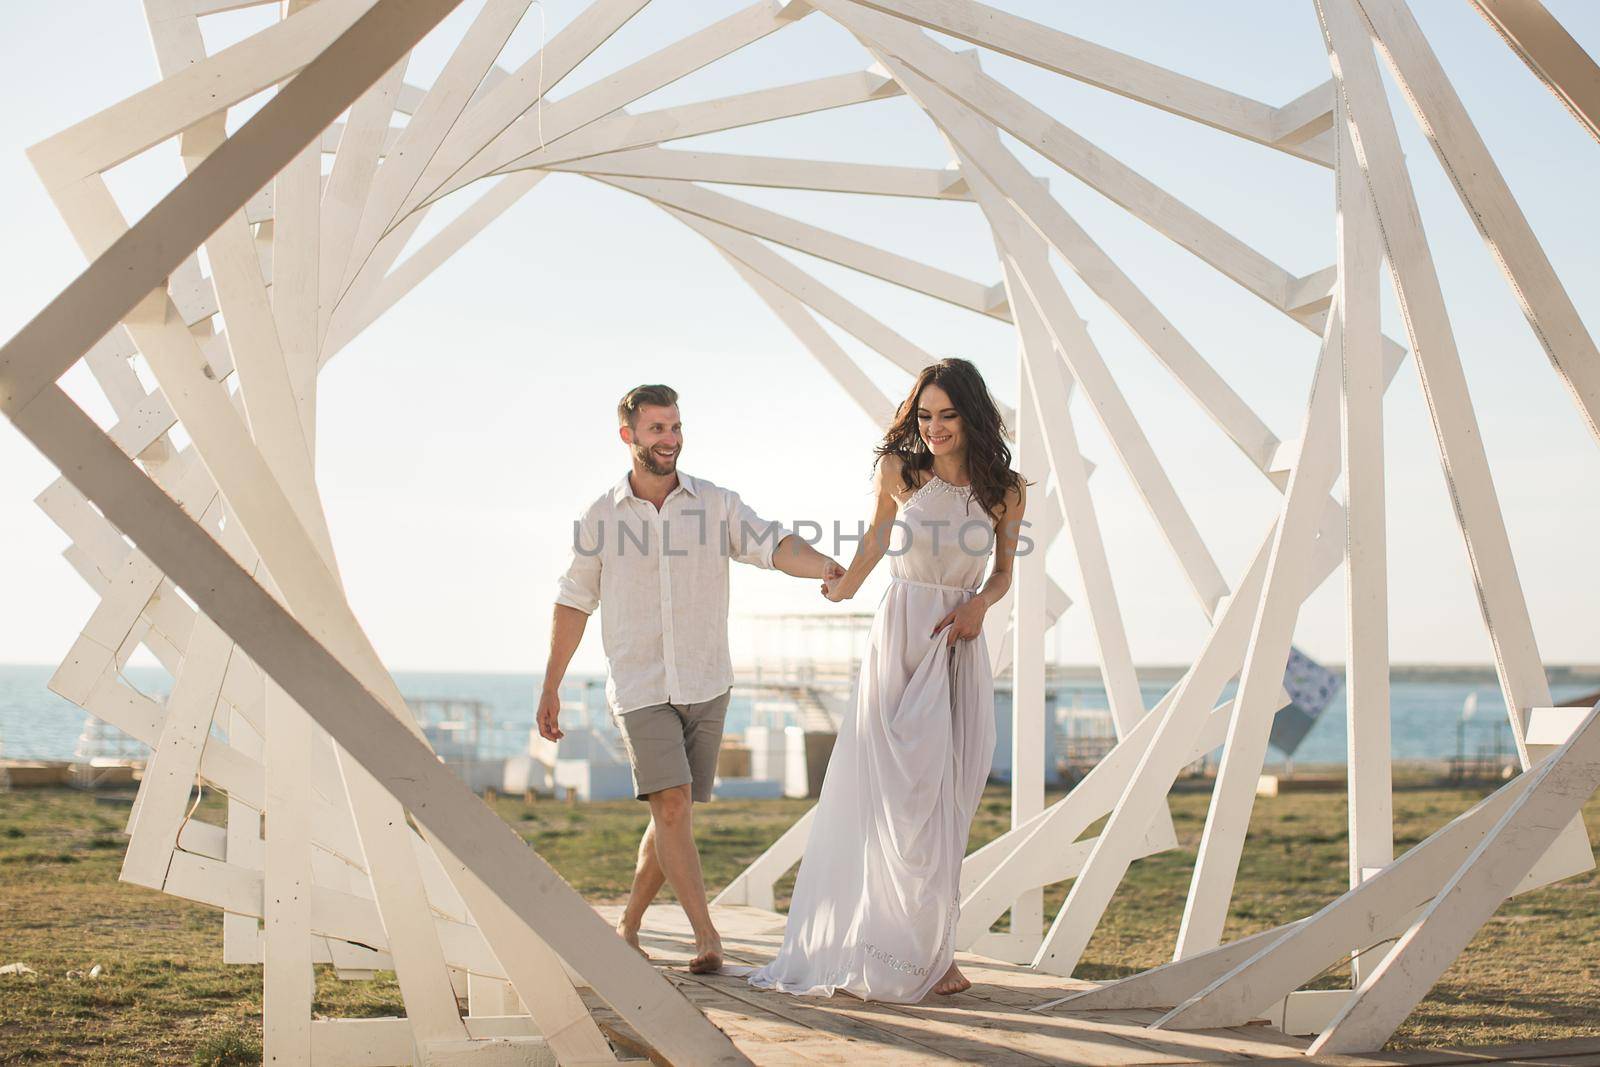 Man and woman posing. Geometric wooden structures. The bride and groom.